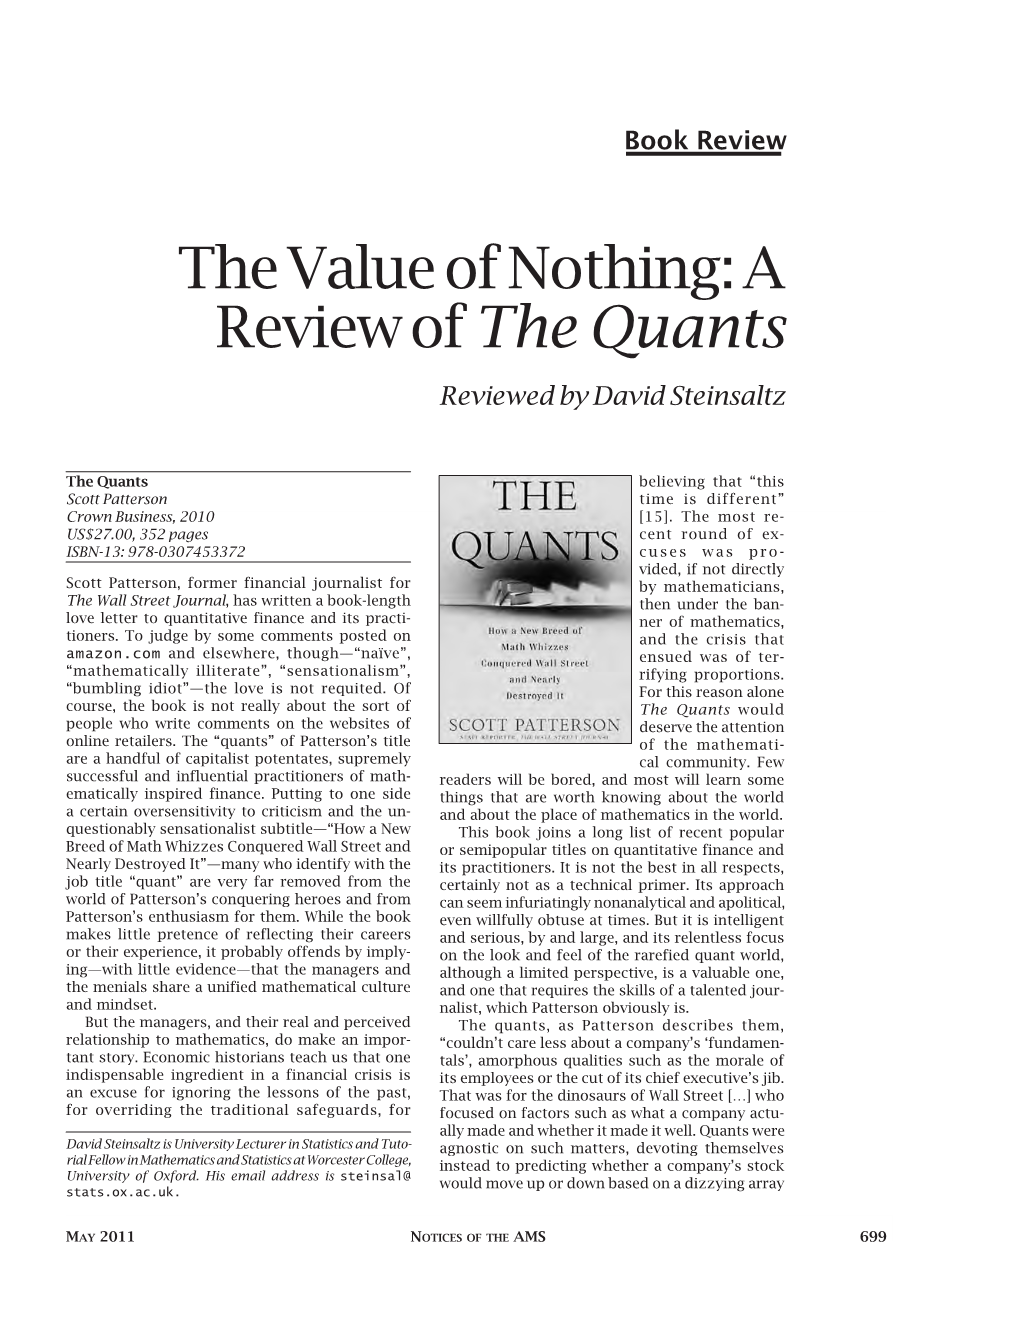 The Quants Reviewed by David Steinsaltz